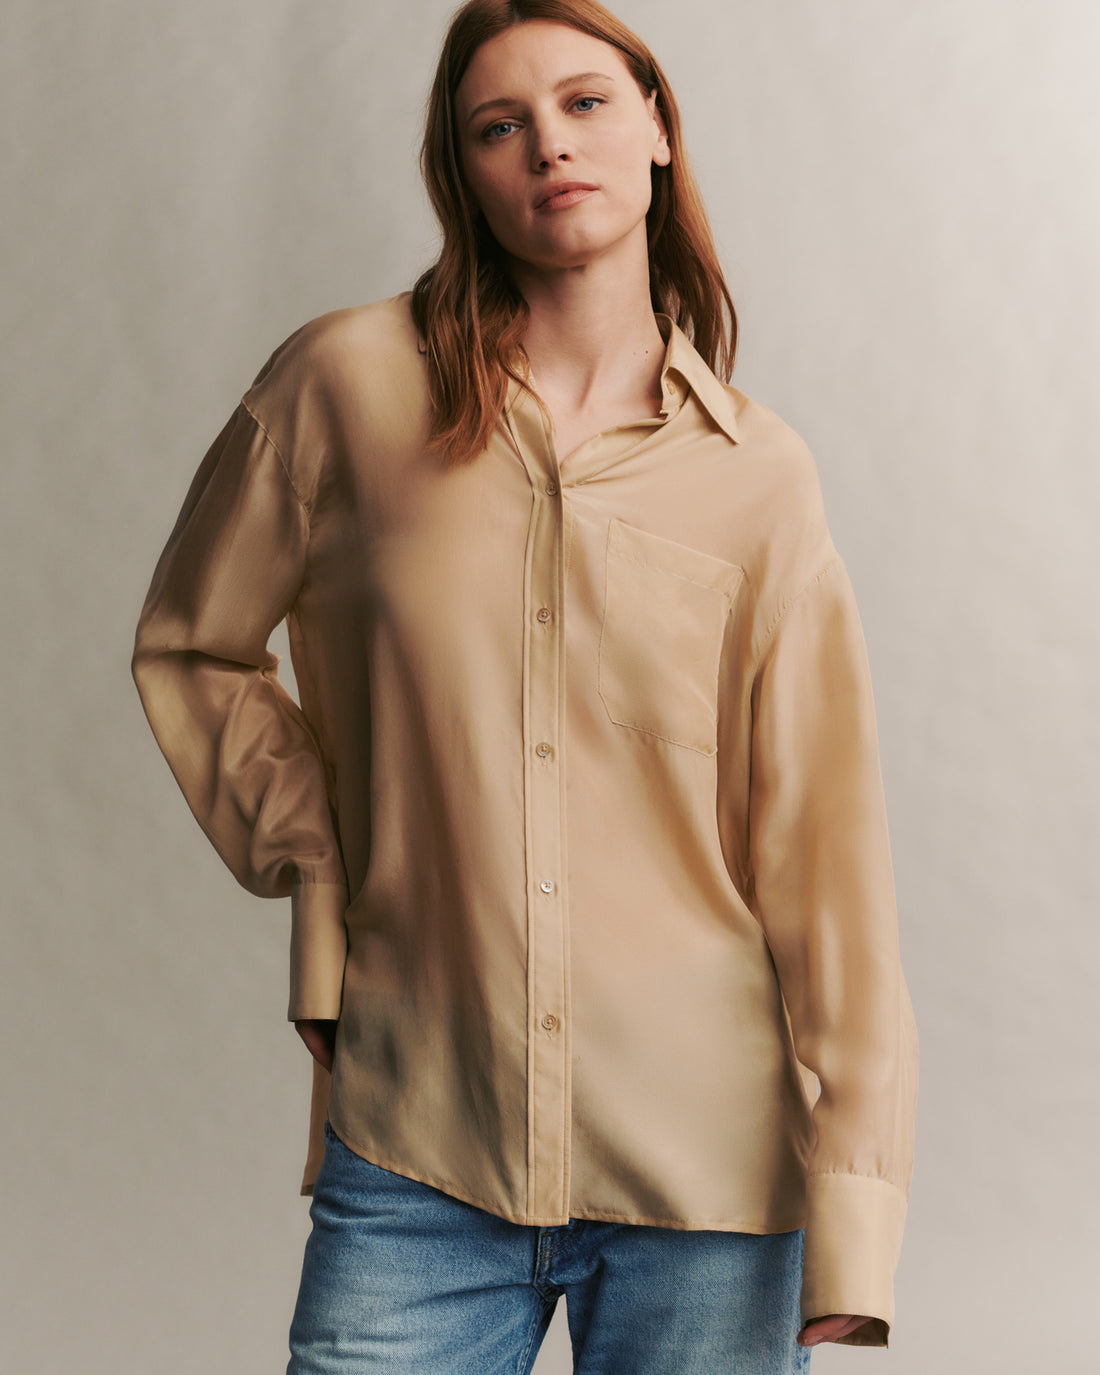 The TWP Big Joe Shirt in Tan available at The New Trend Australia